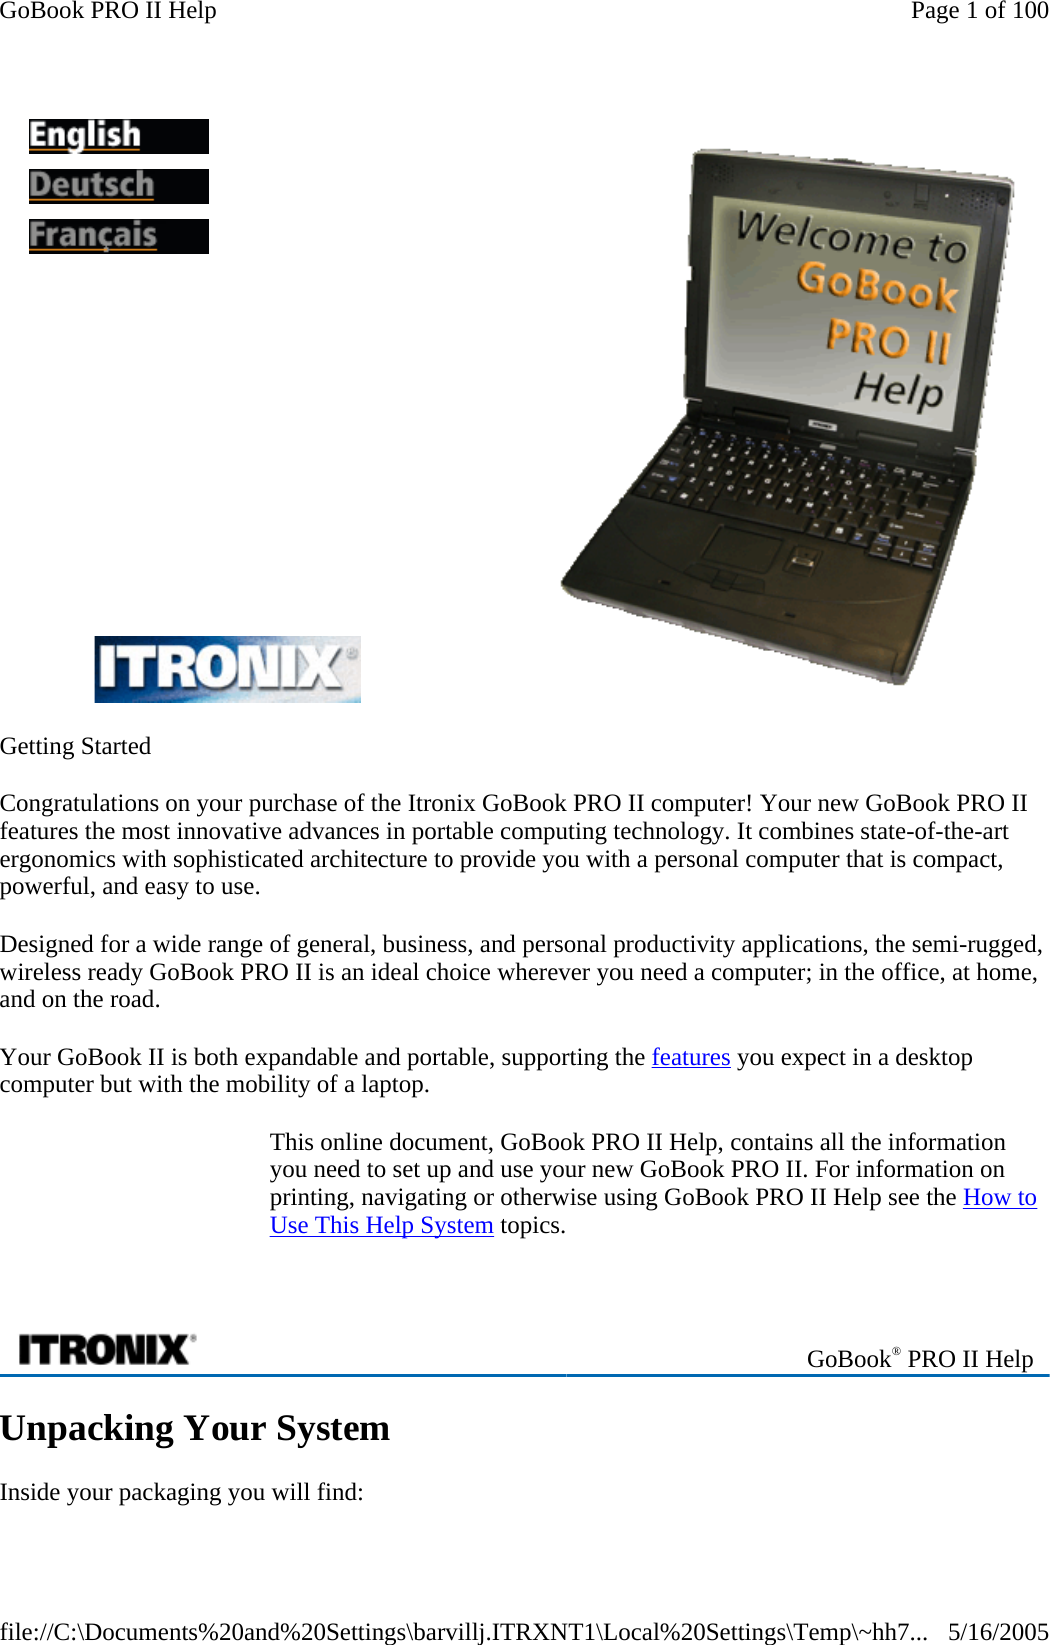 Getting Started Congratulations on your purchase of the Itronix GoBook PRO II computer! Your new GoBook PRO II features the most innovative advances in portable computing technology. It combines state-of-the-art ergonomics with sophisticated architecture to provide you with a personal computer that is compact, powerful, and easy to use.  Designed for a wide range of general, business, and personal productivity applications, the semi-rugged, wireless ready GoBook PRO II is an ideal choice wherever you need a computer; in the office, at home, and on the road. Your GoBook II is both expandable and portable, supporting the features you expect in a desktop computer but with the mobility of a laptop. This online document, GoBook PRO II Help, contains all the information you need to set up and use your new GoBook PRO II. For information on printing, navigating or otherwise using GoBook PRO II Help see the How to Use This Help System topics.   Unpacking Your System Inside your packaging you will find:            GoBook® PRO II Help Page 1 of 100GoBook PRO II Help5/16/2005file://C:\Documents%20and%20Settings\barvillj.ITRXNT1\Local%20Settings\Temp\~hh7...